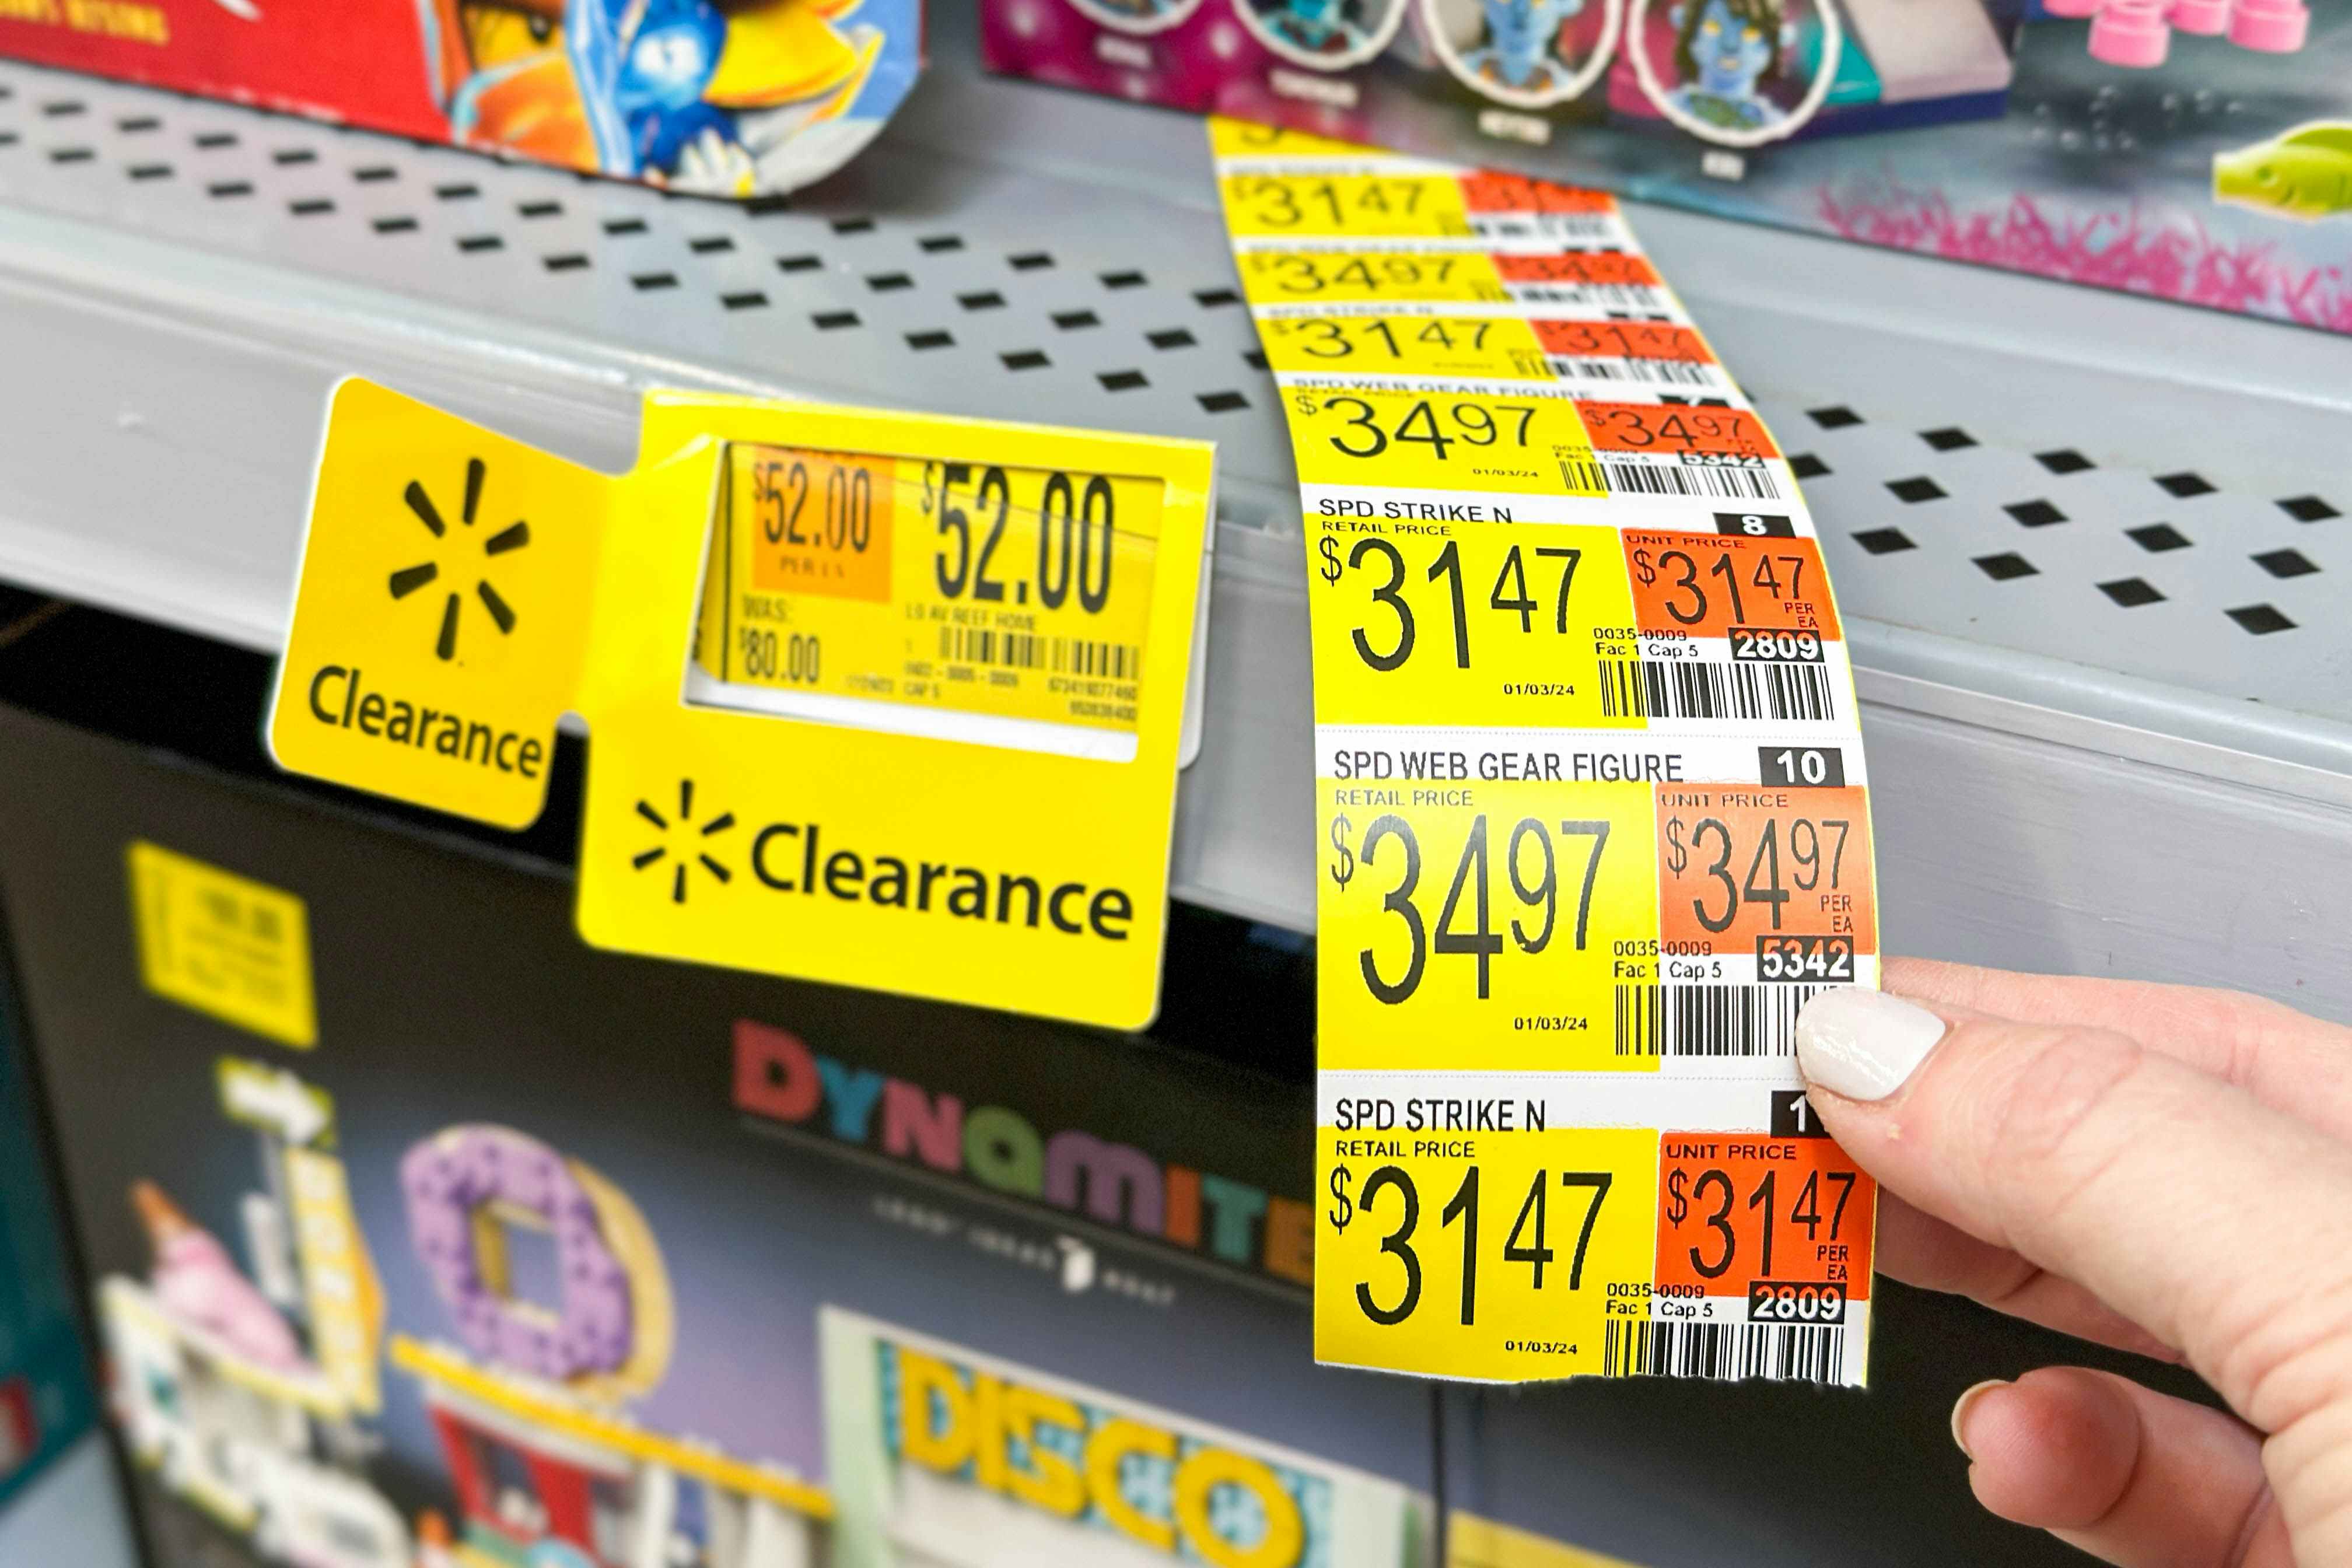 The Walmart Toy Clearance is Officially Up to 72% Off In Stores